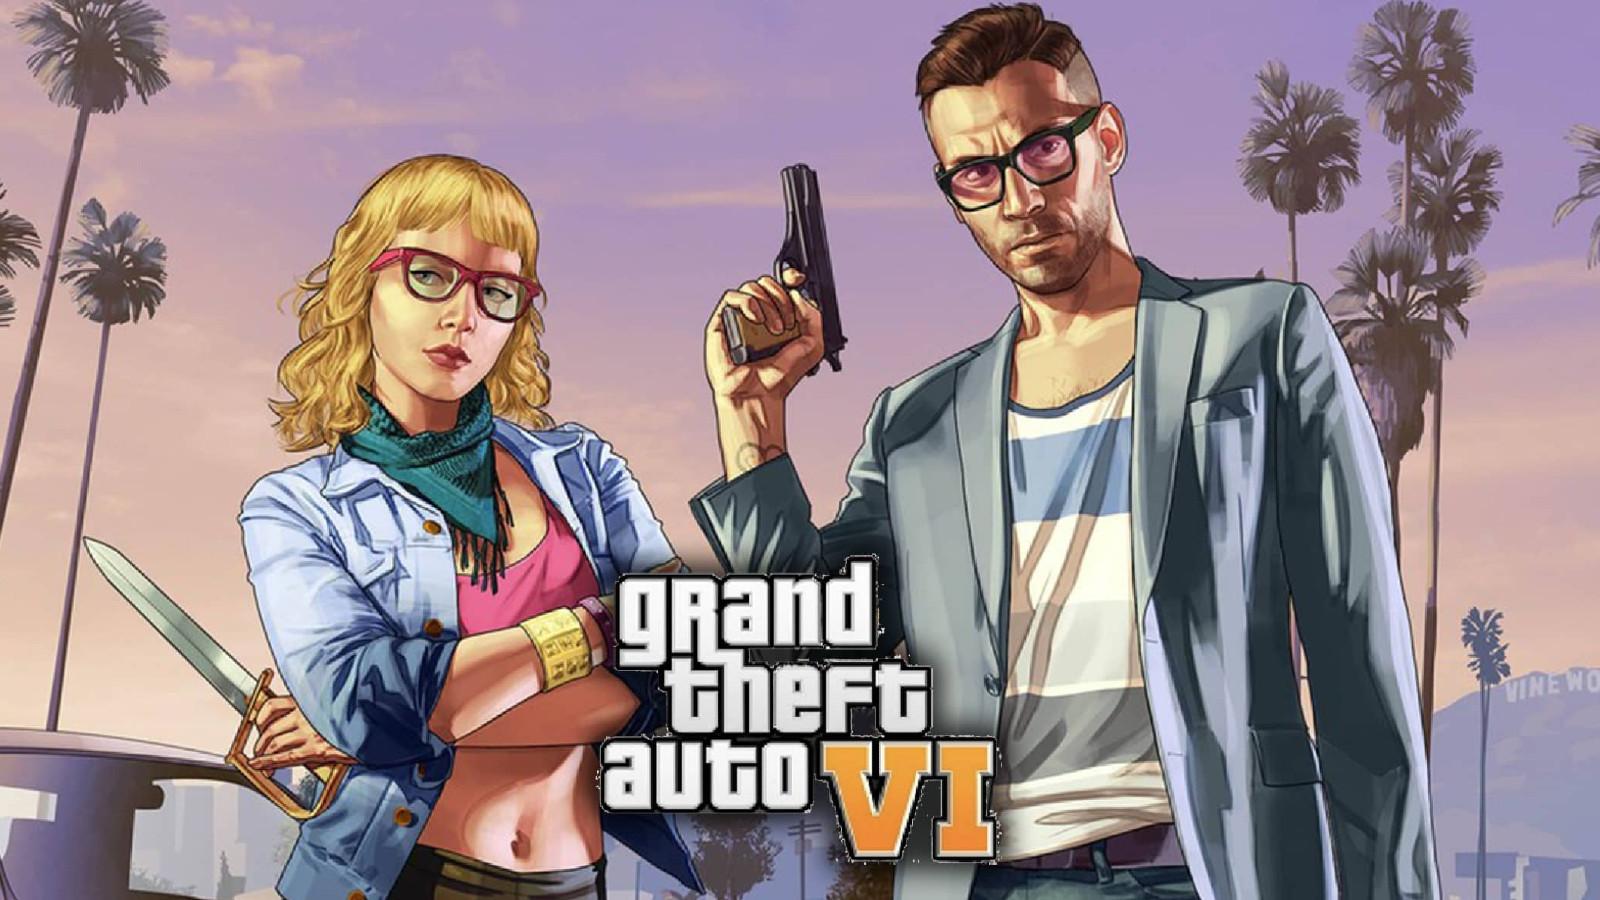 GTA 6 Preorder date leak sparks excitement: Alleged December 12 release  expected